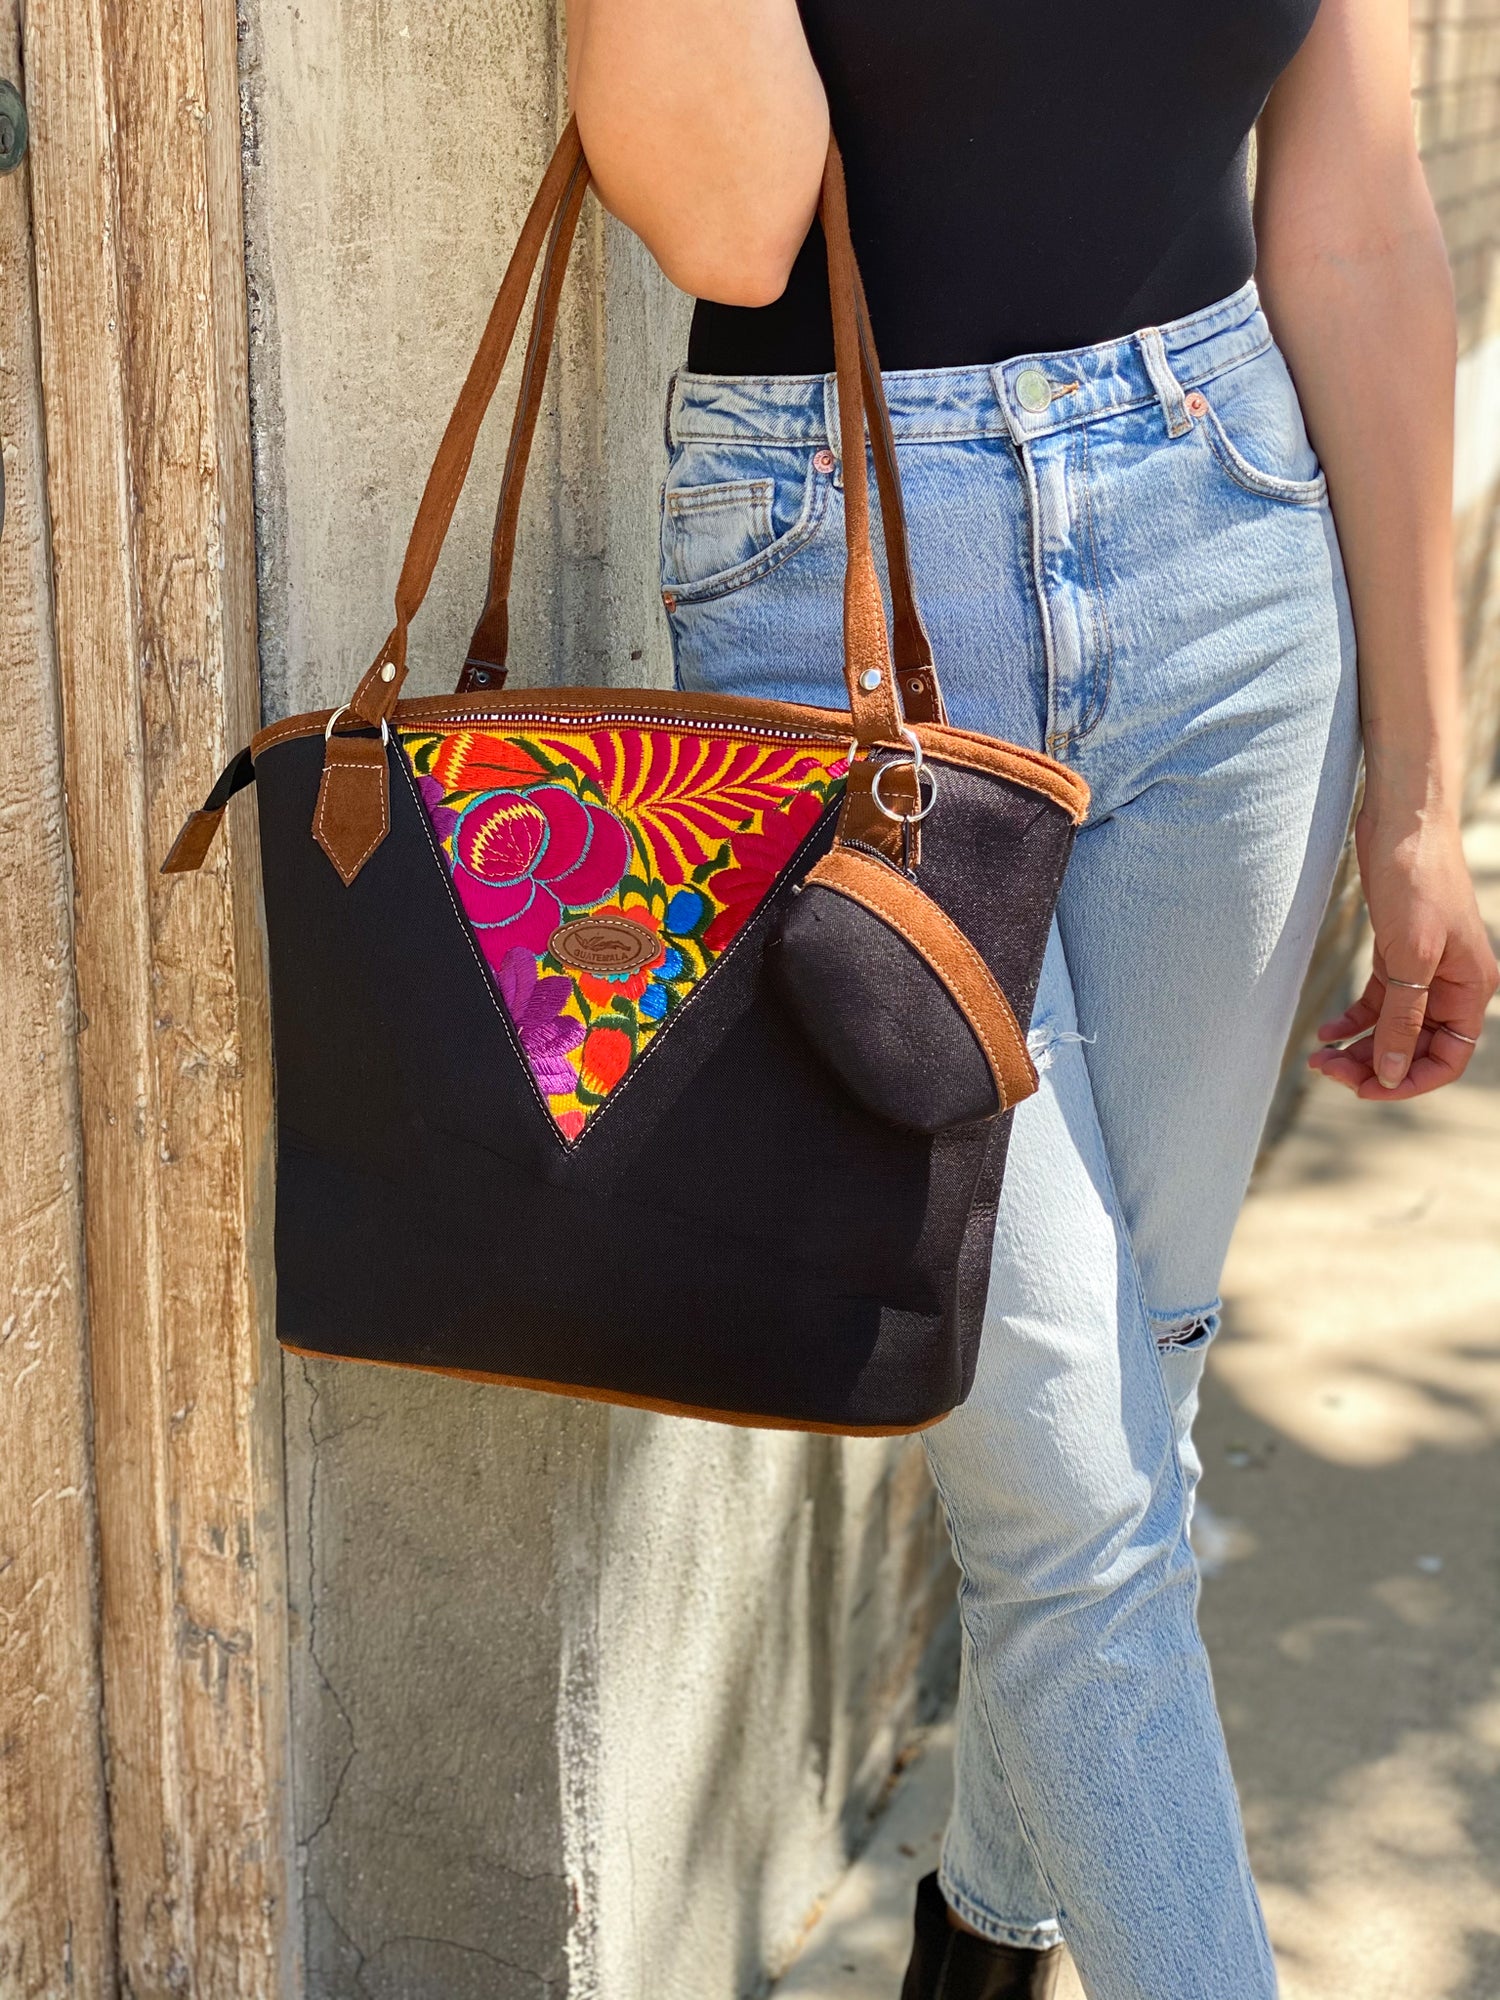 Black embroidery tote bag with floral detail. Handmade in Guatemala with Handwoven intricate fabric. The perfect laptop or beach bag.